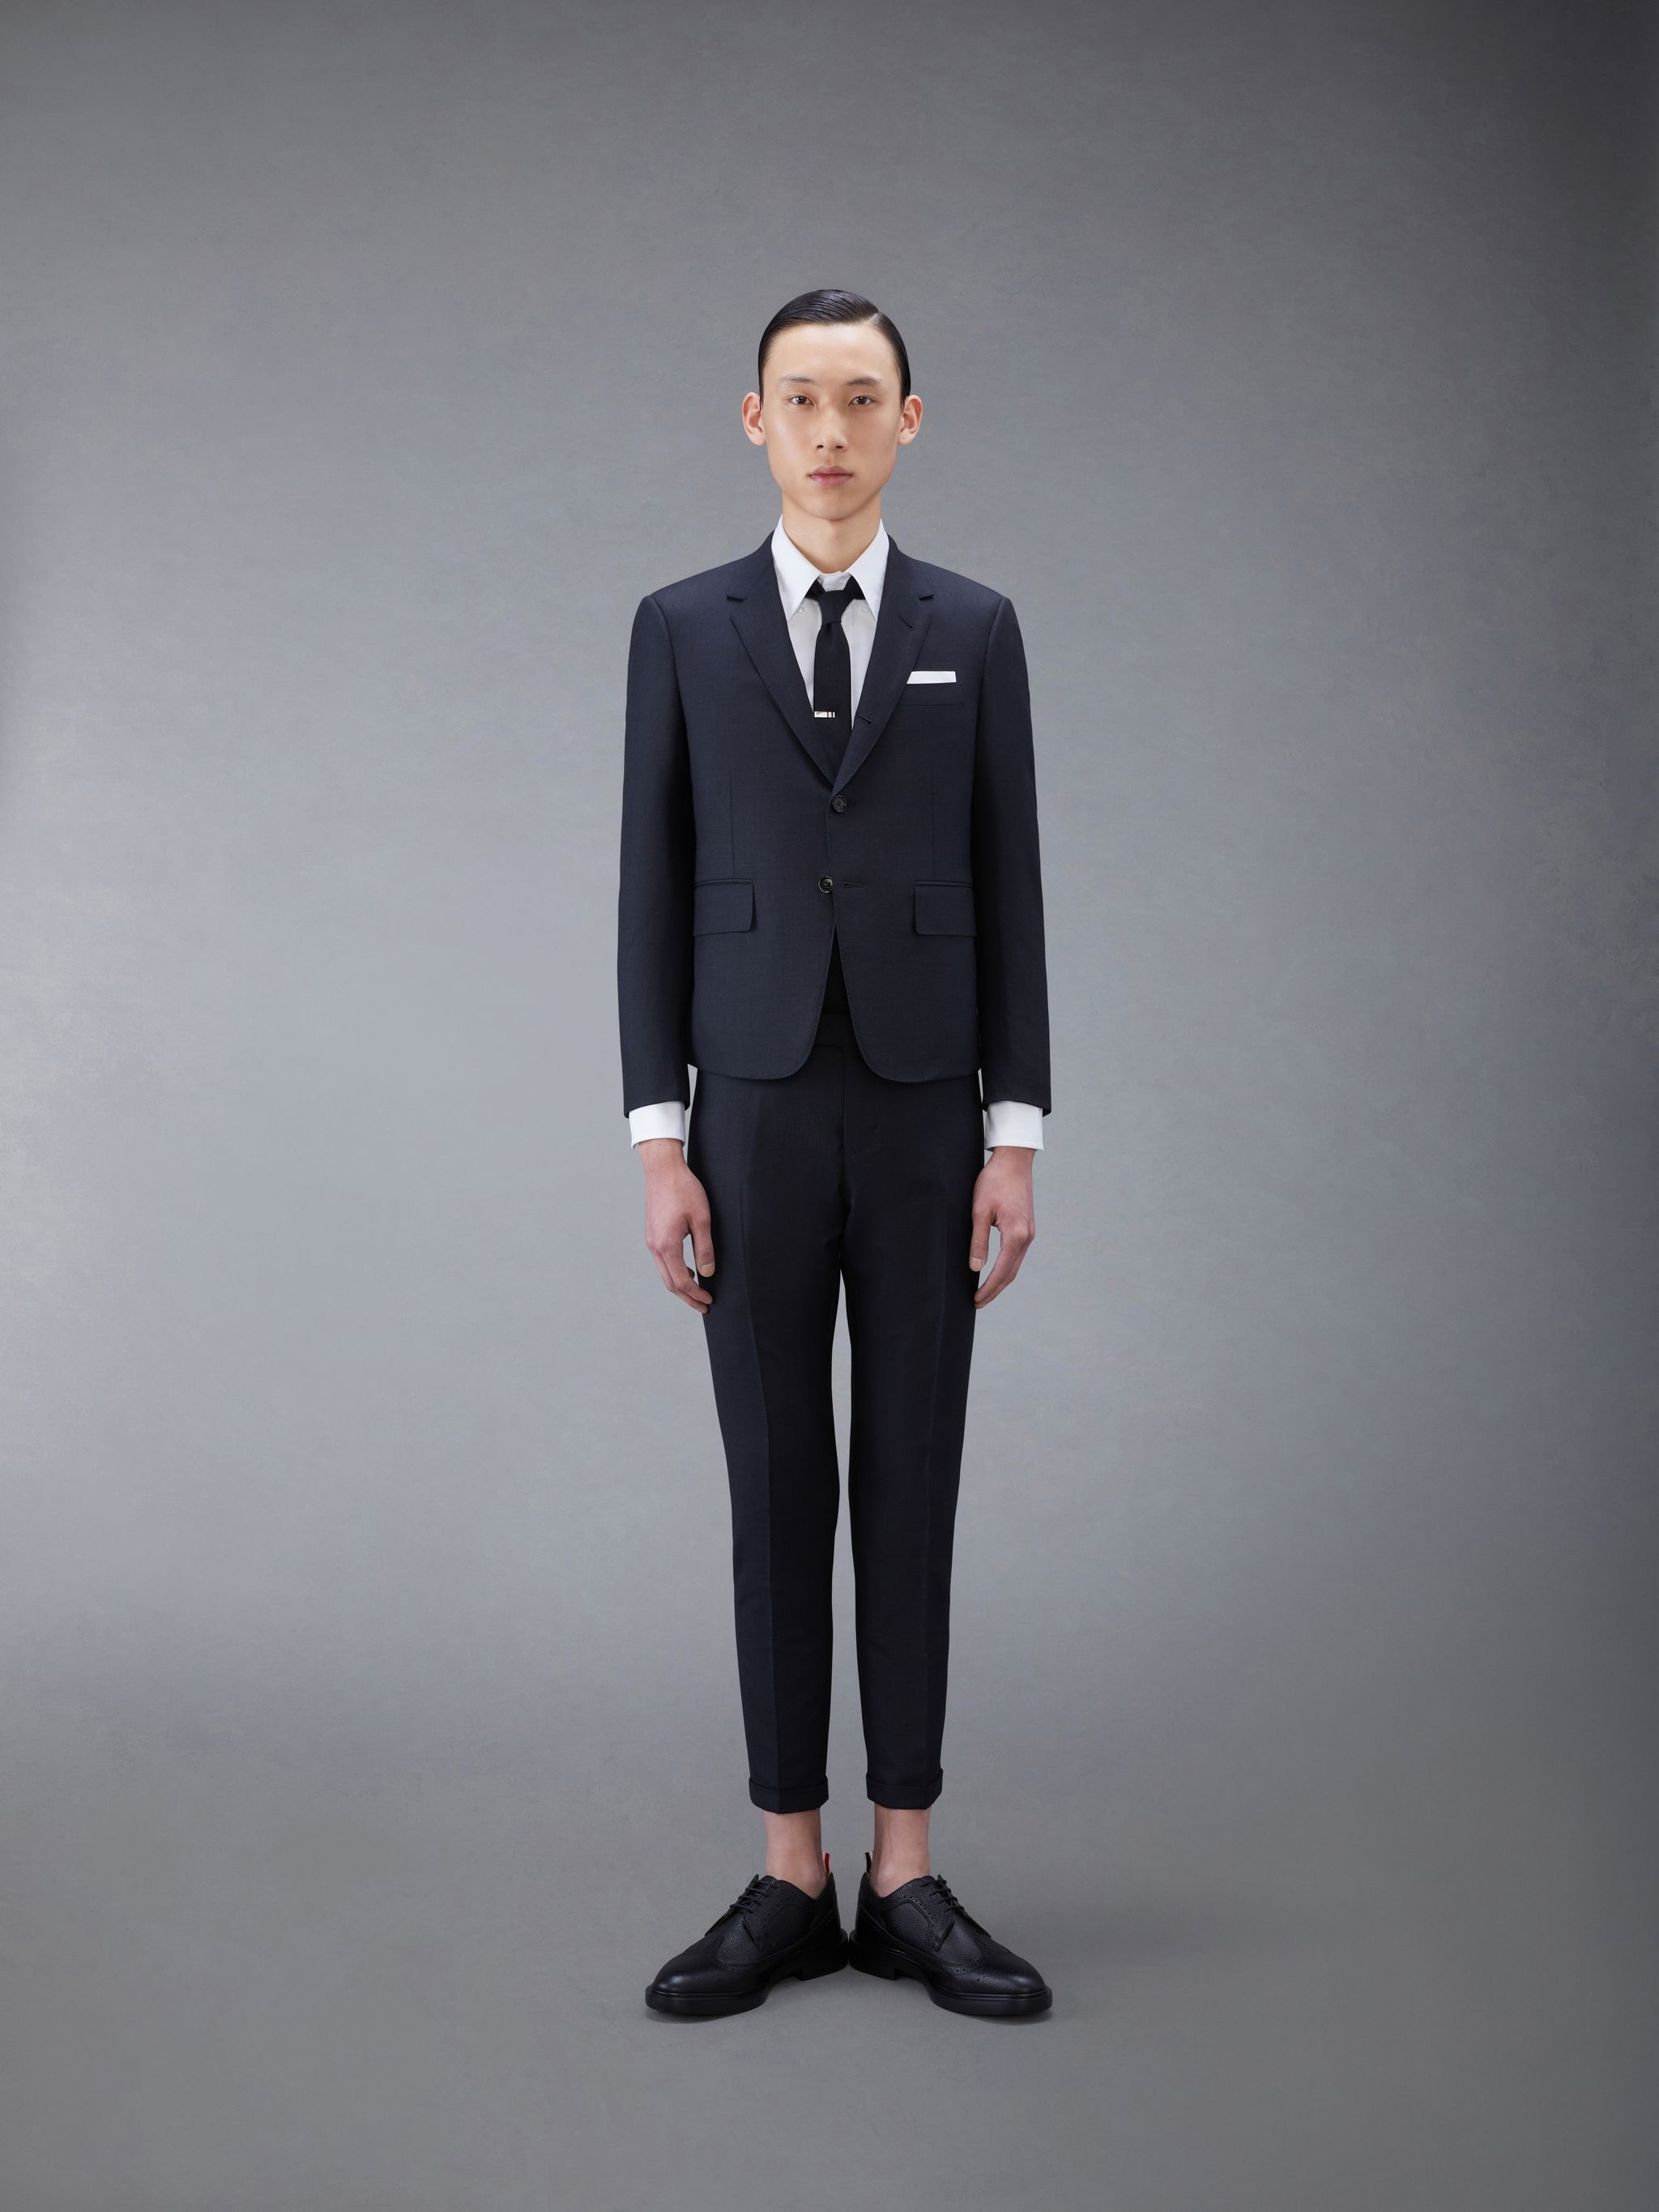 CHARCOAL GREY SUPER 120S TWILL HIGH ARMHOLE SUIT WITH TIE AND LOW RISE SKINNY TROUSER - 1